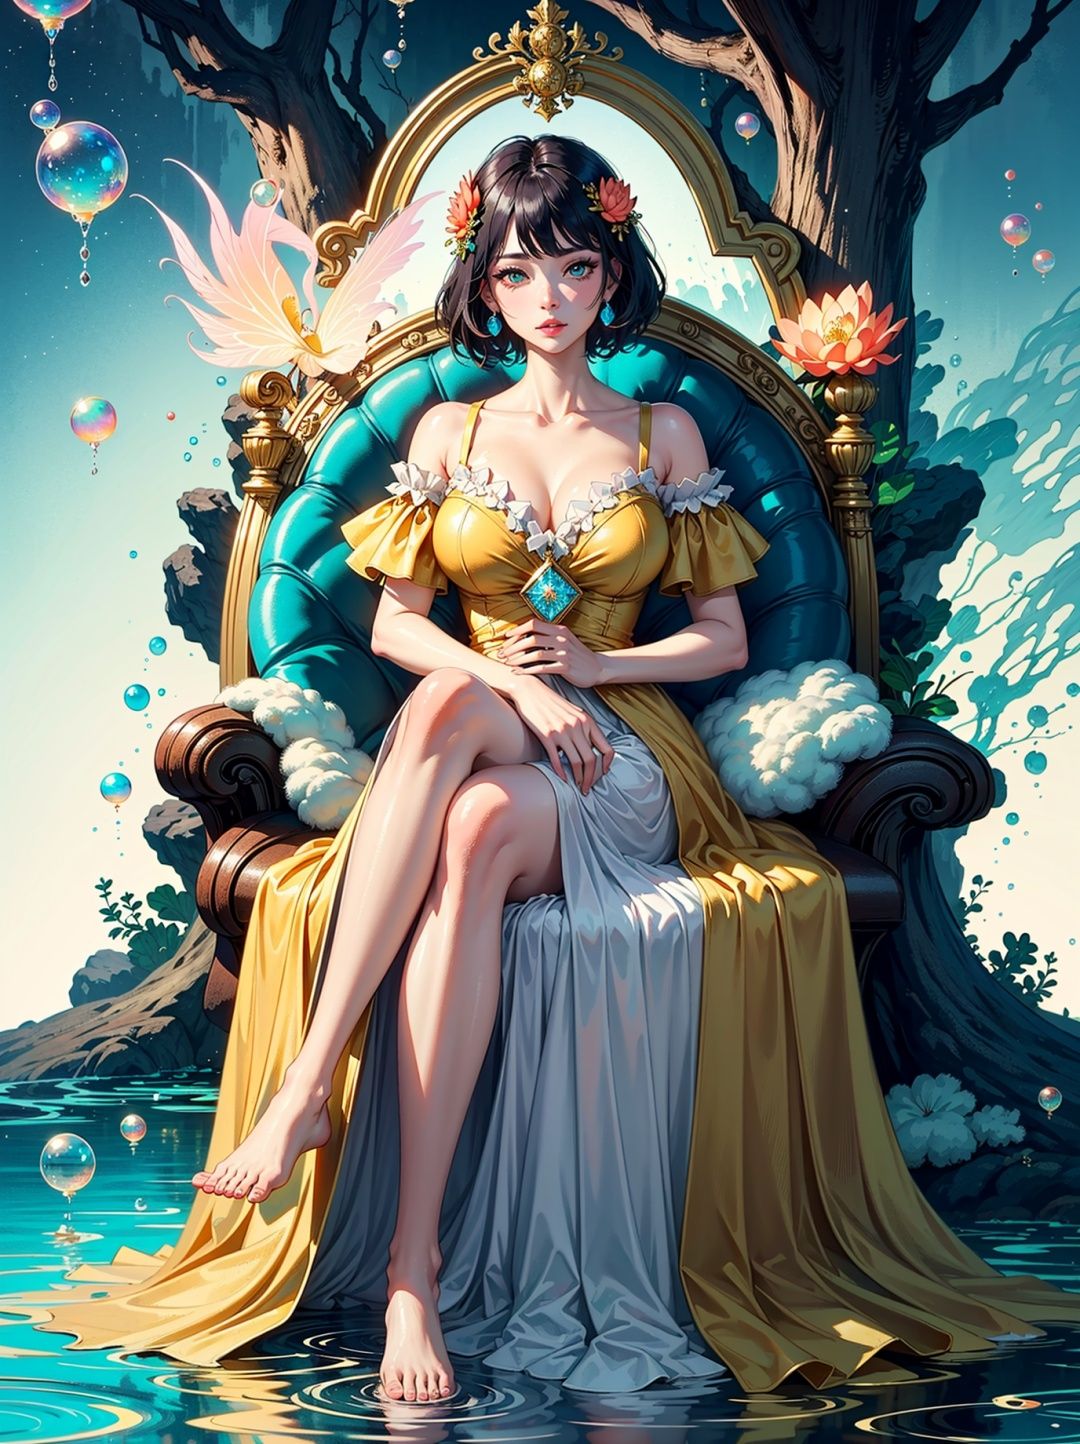 (Lotus Pond, Golden Fairy Dress, Close Up, Jade Ruyi Transparent Dress, Tianchi, Colorful Cloud Sea, Facing Me, Looking Up, Renaissance, Barefoot, 5 Toes, Long Legs, Liquid Tree, Liquid Mountain, Gaseous Sky, High Definition)), (((Super Detailed, Extreme Detail))), Ultra Fine Painting, Master Made, Full Body Photo, High Quality, 8k, Light Rainbow Shining Hair, Short Hair, Perfect eye makeup, chubby lips, collarbone, (huge crystals, soap bubbles, Dingdall effect, coral, coral, plush decoration)